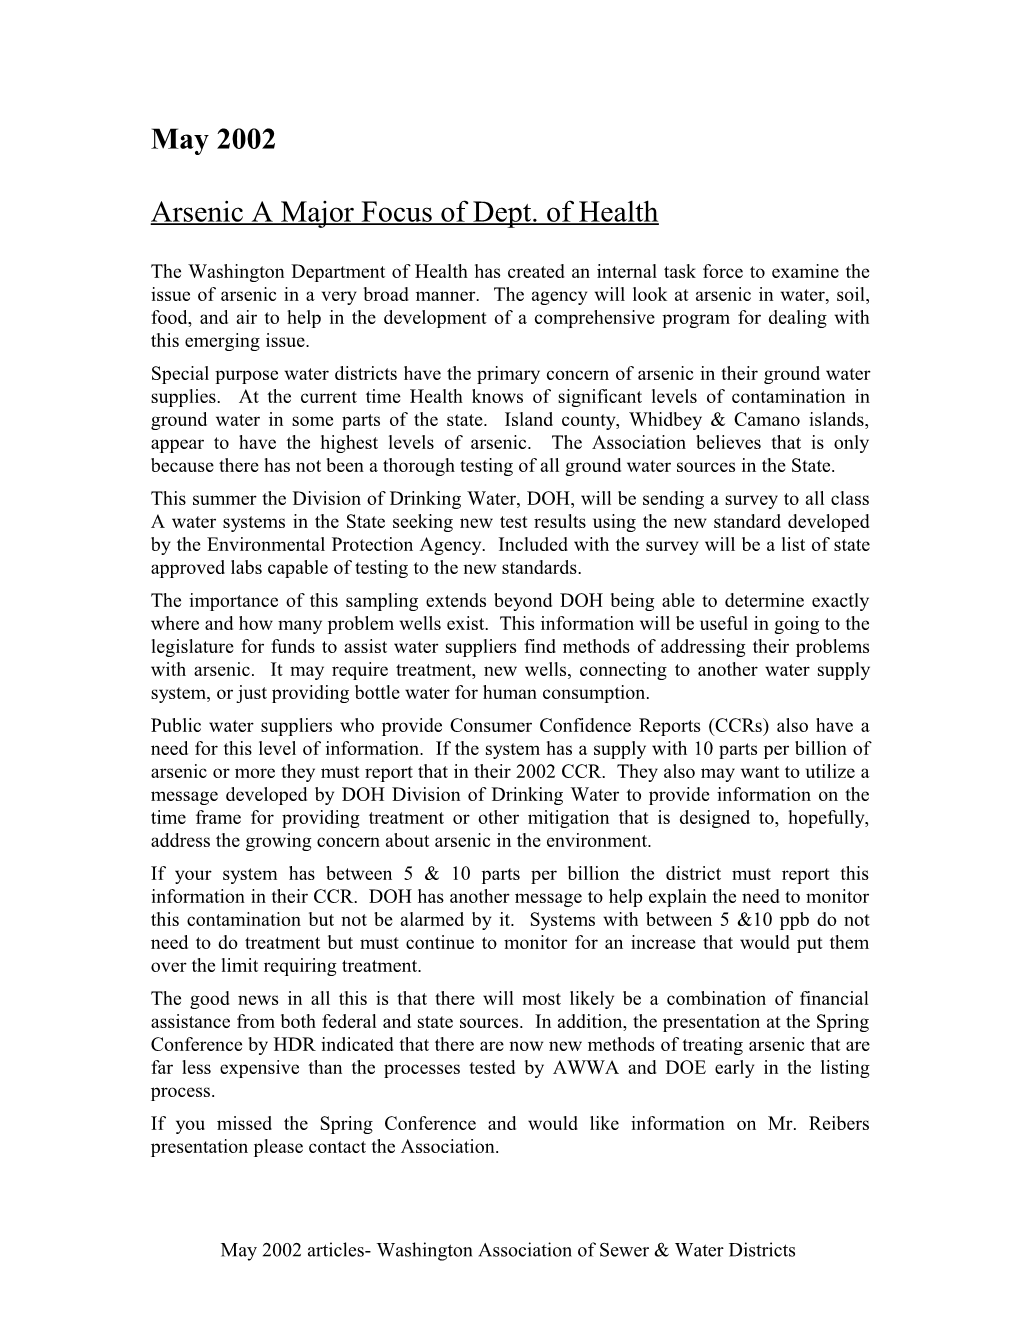 Arsenic a Major Focus of Dept. of Health